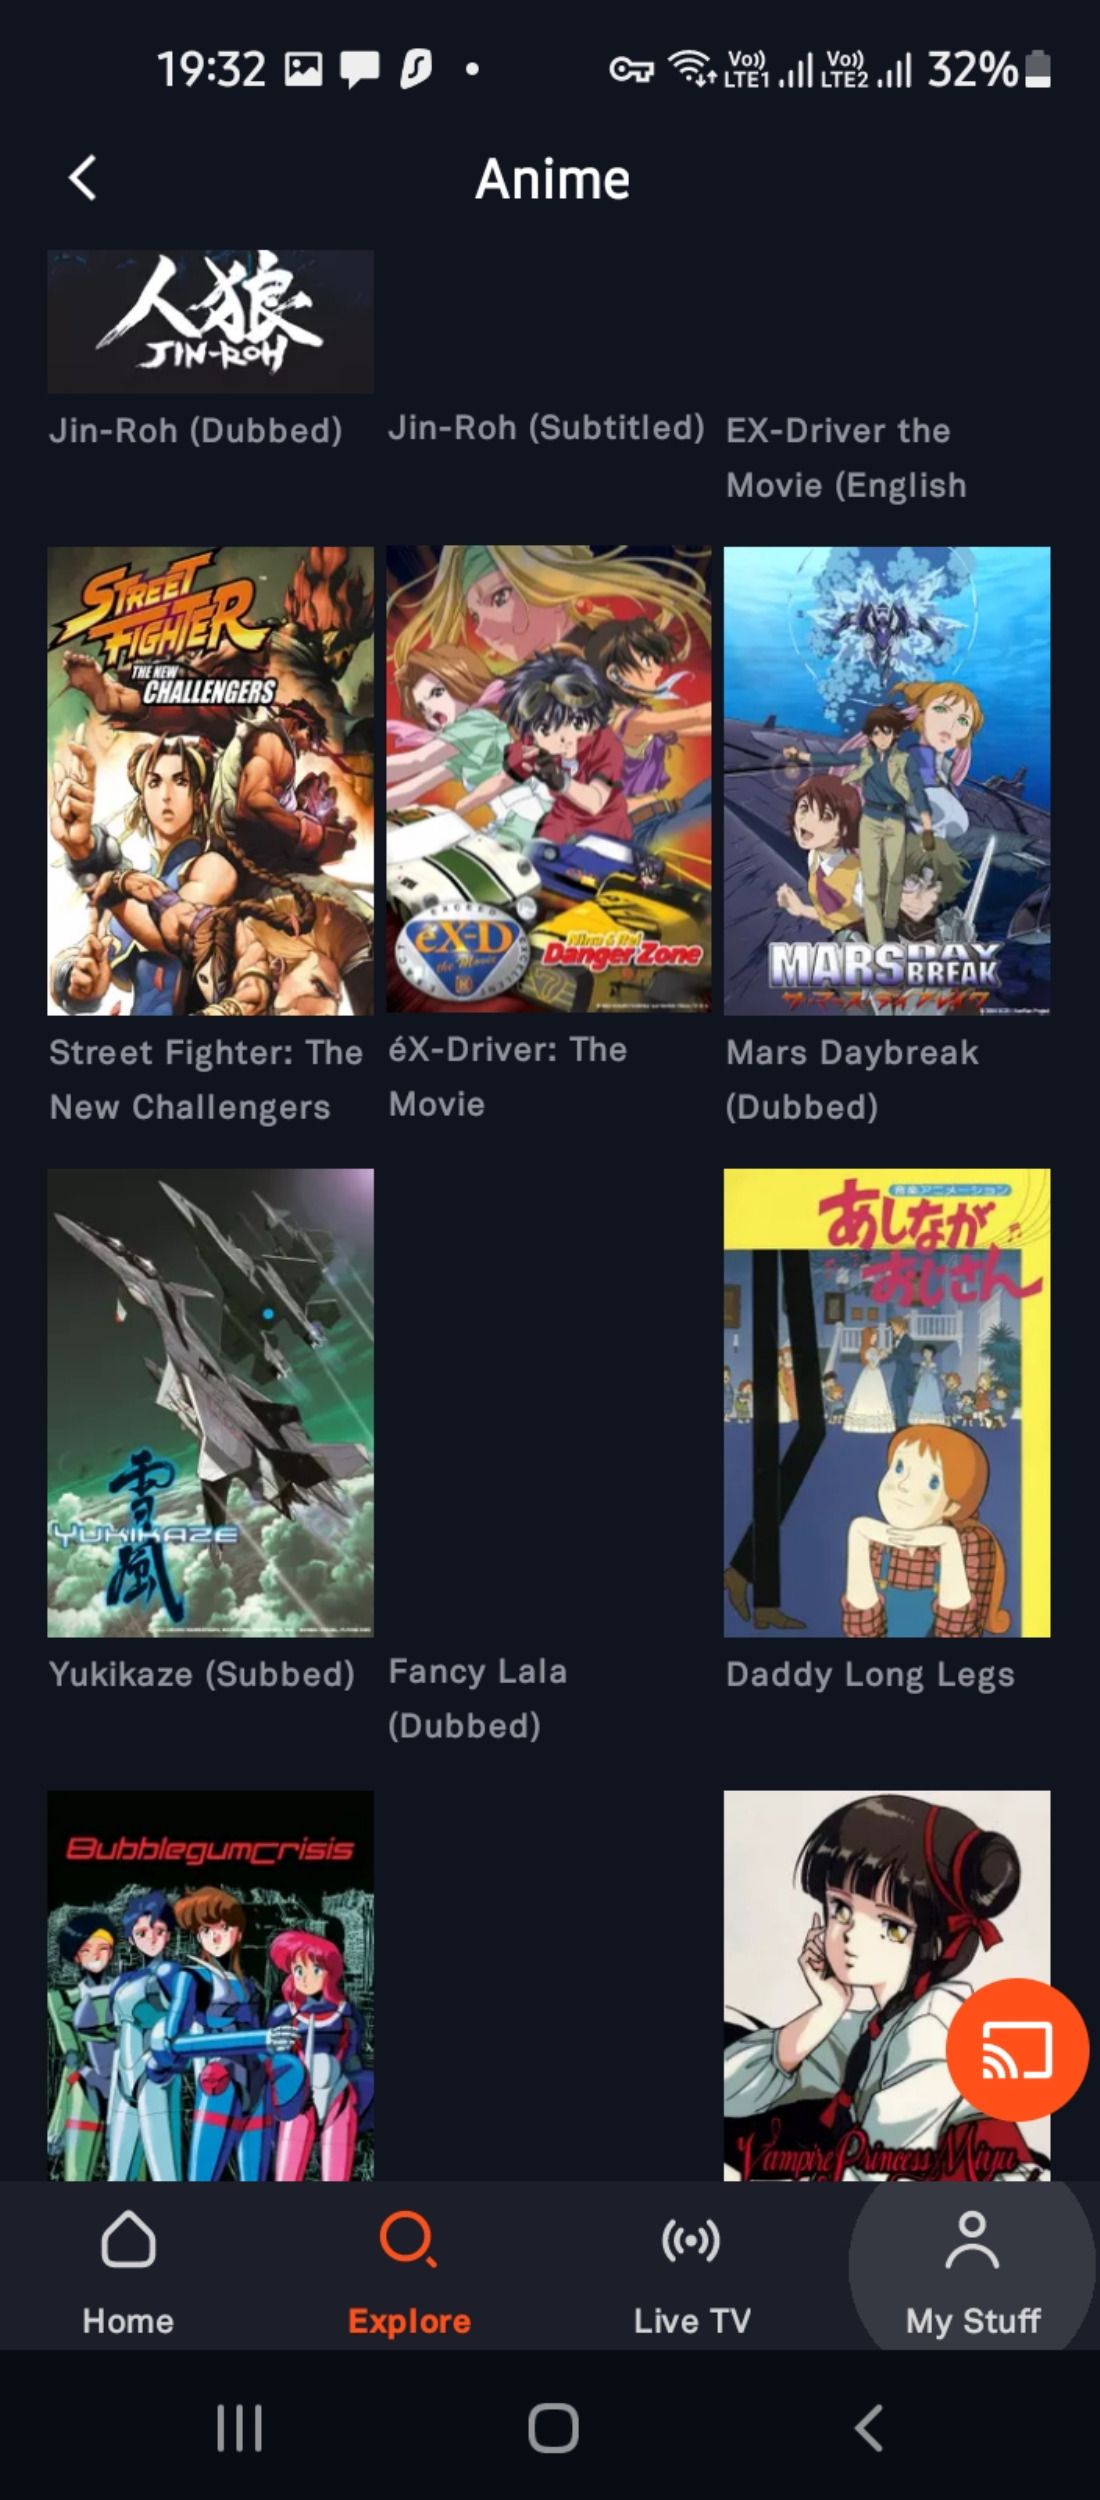 Anime movies collection in Tubi TV